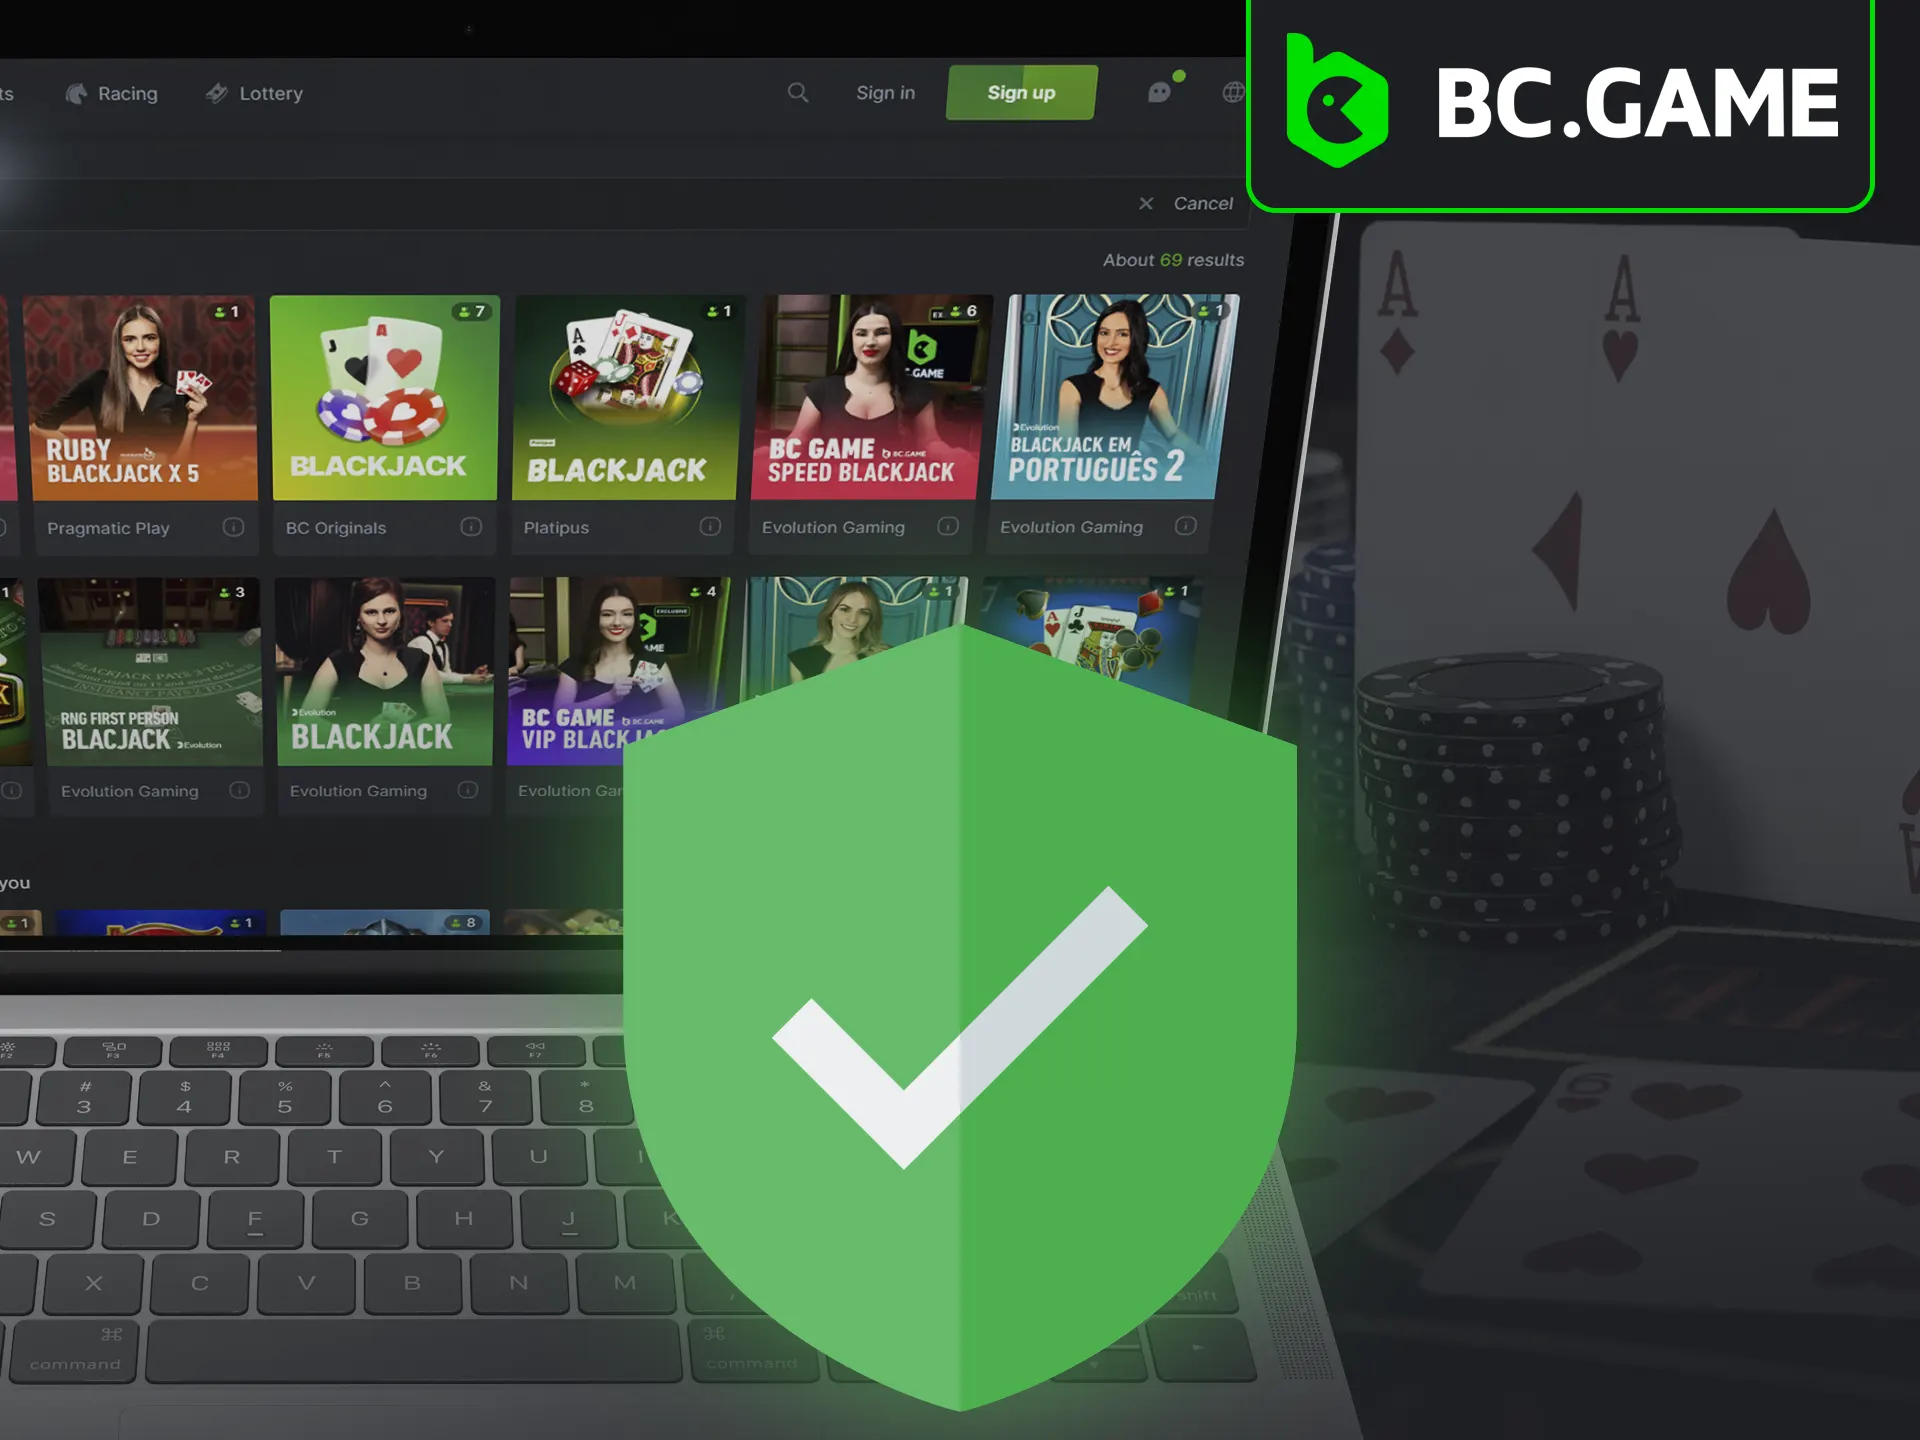 BC Game ensures safety with official license and secure encryption.